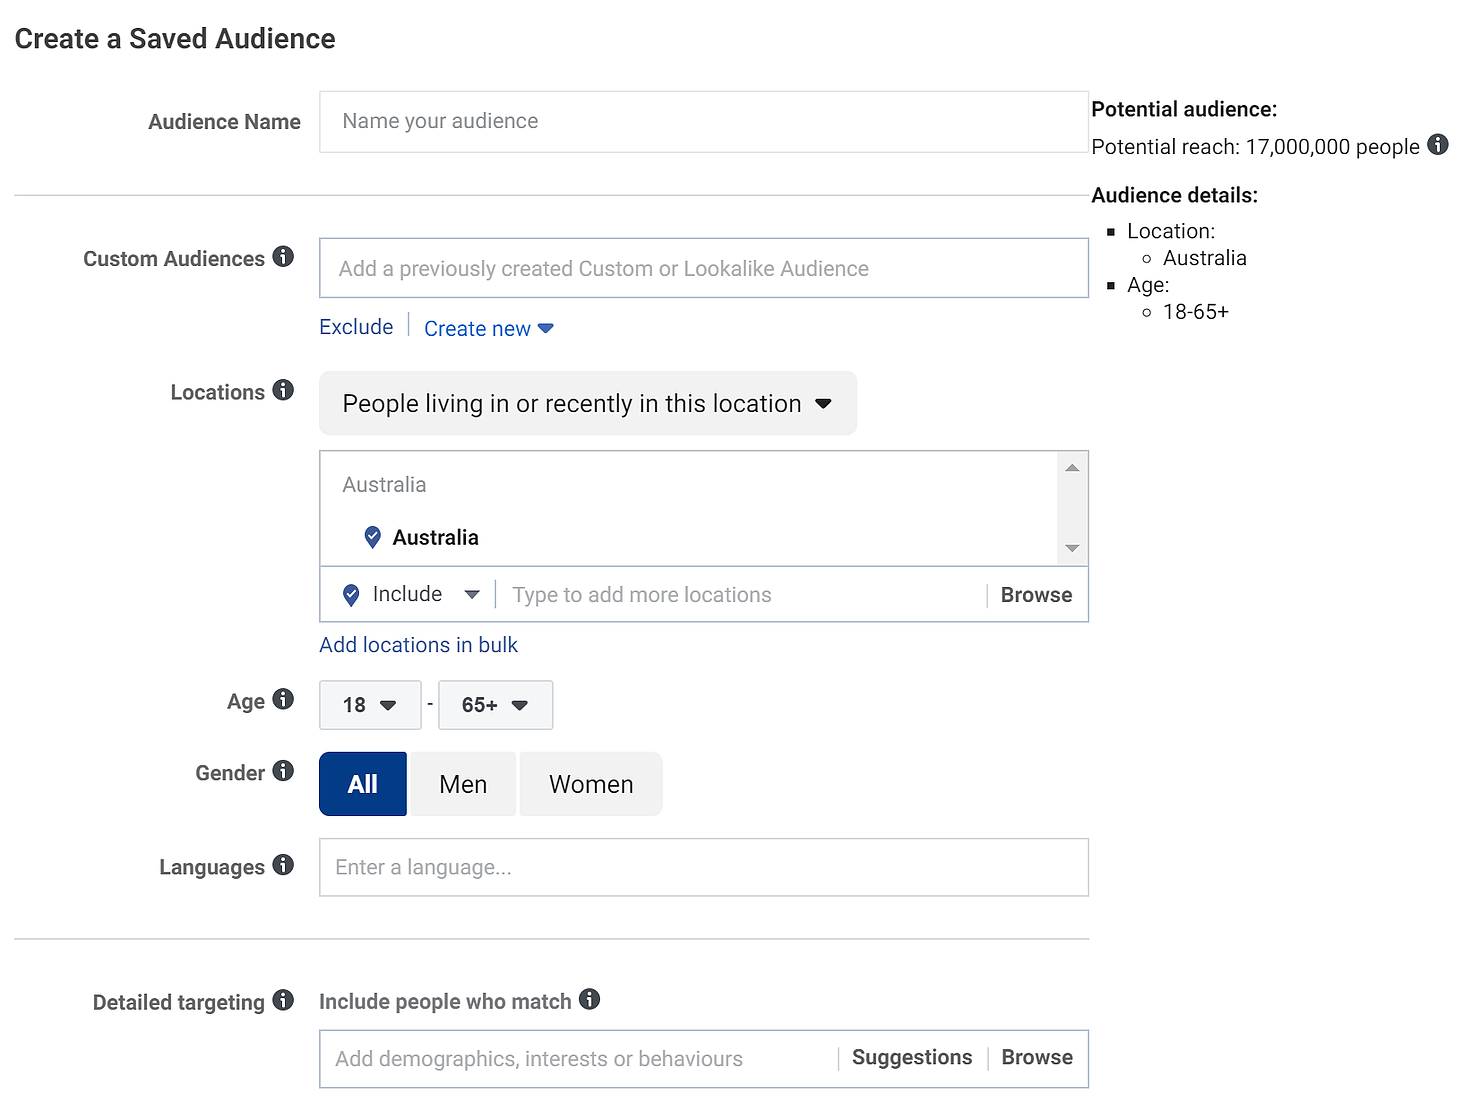 The pop-up creator for Saved Audiences in Facebook